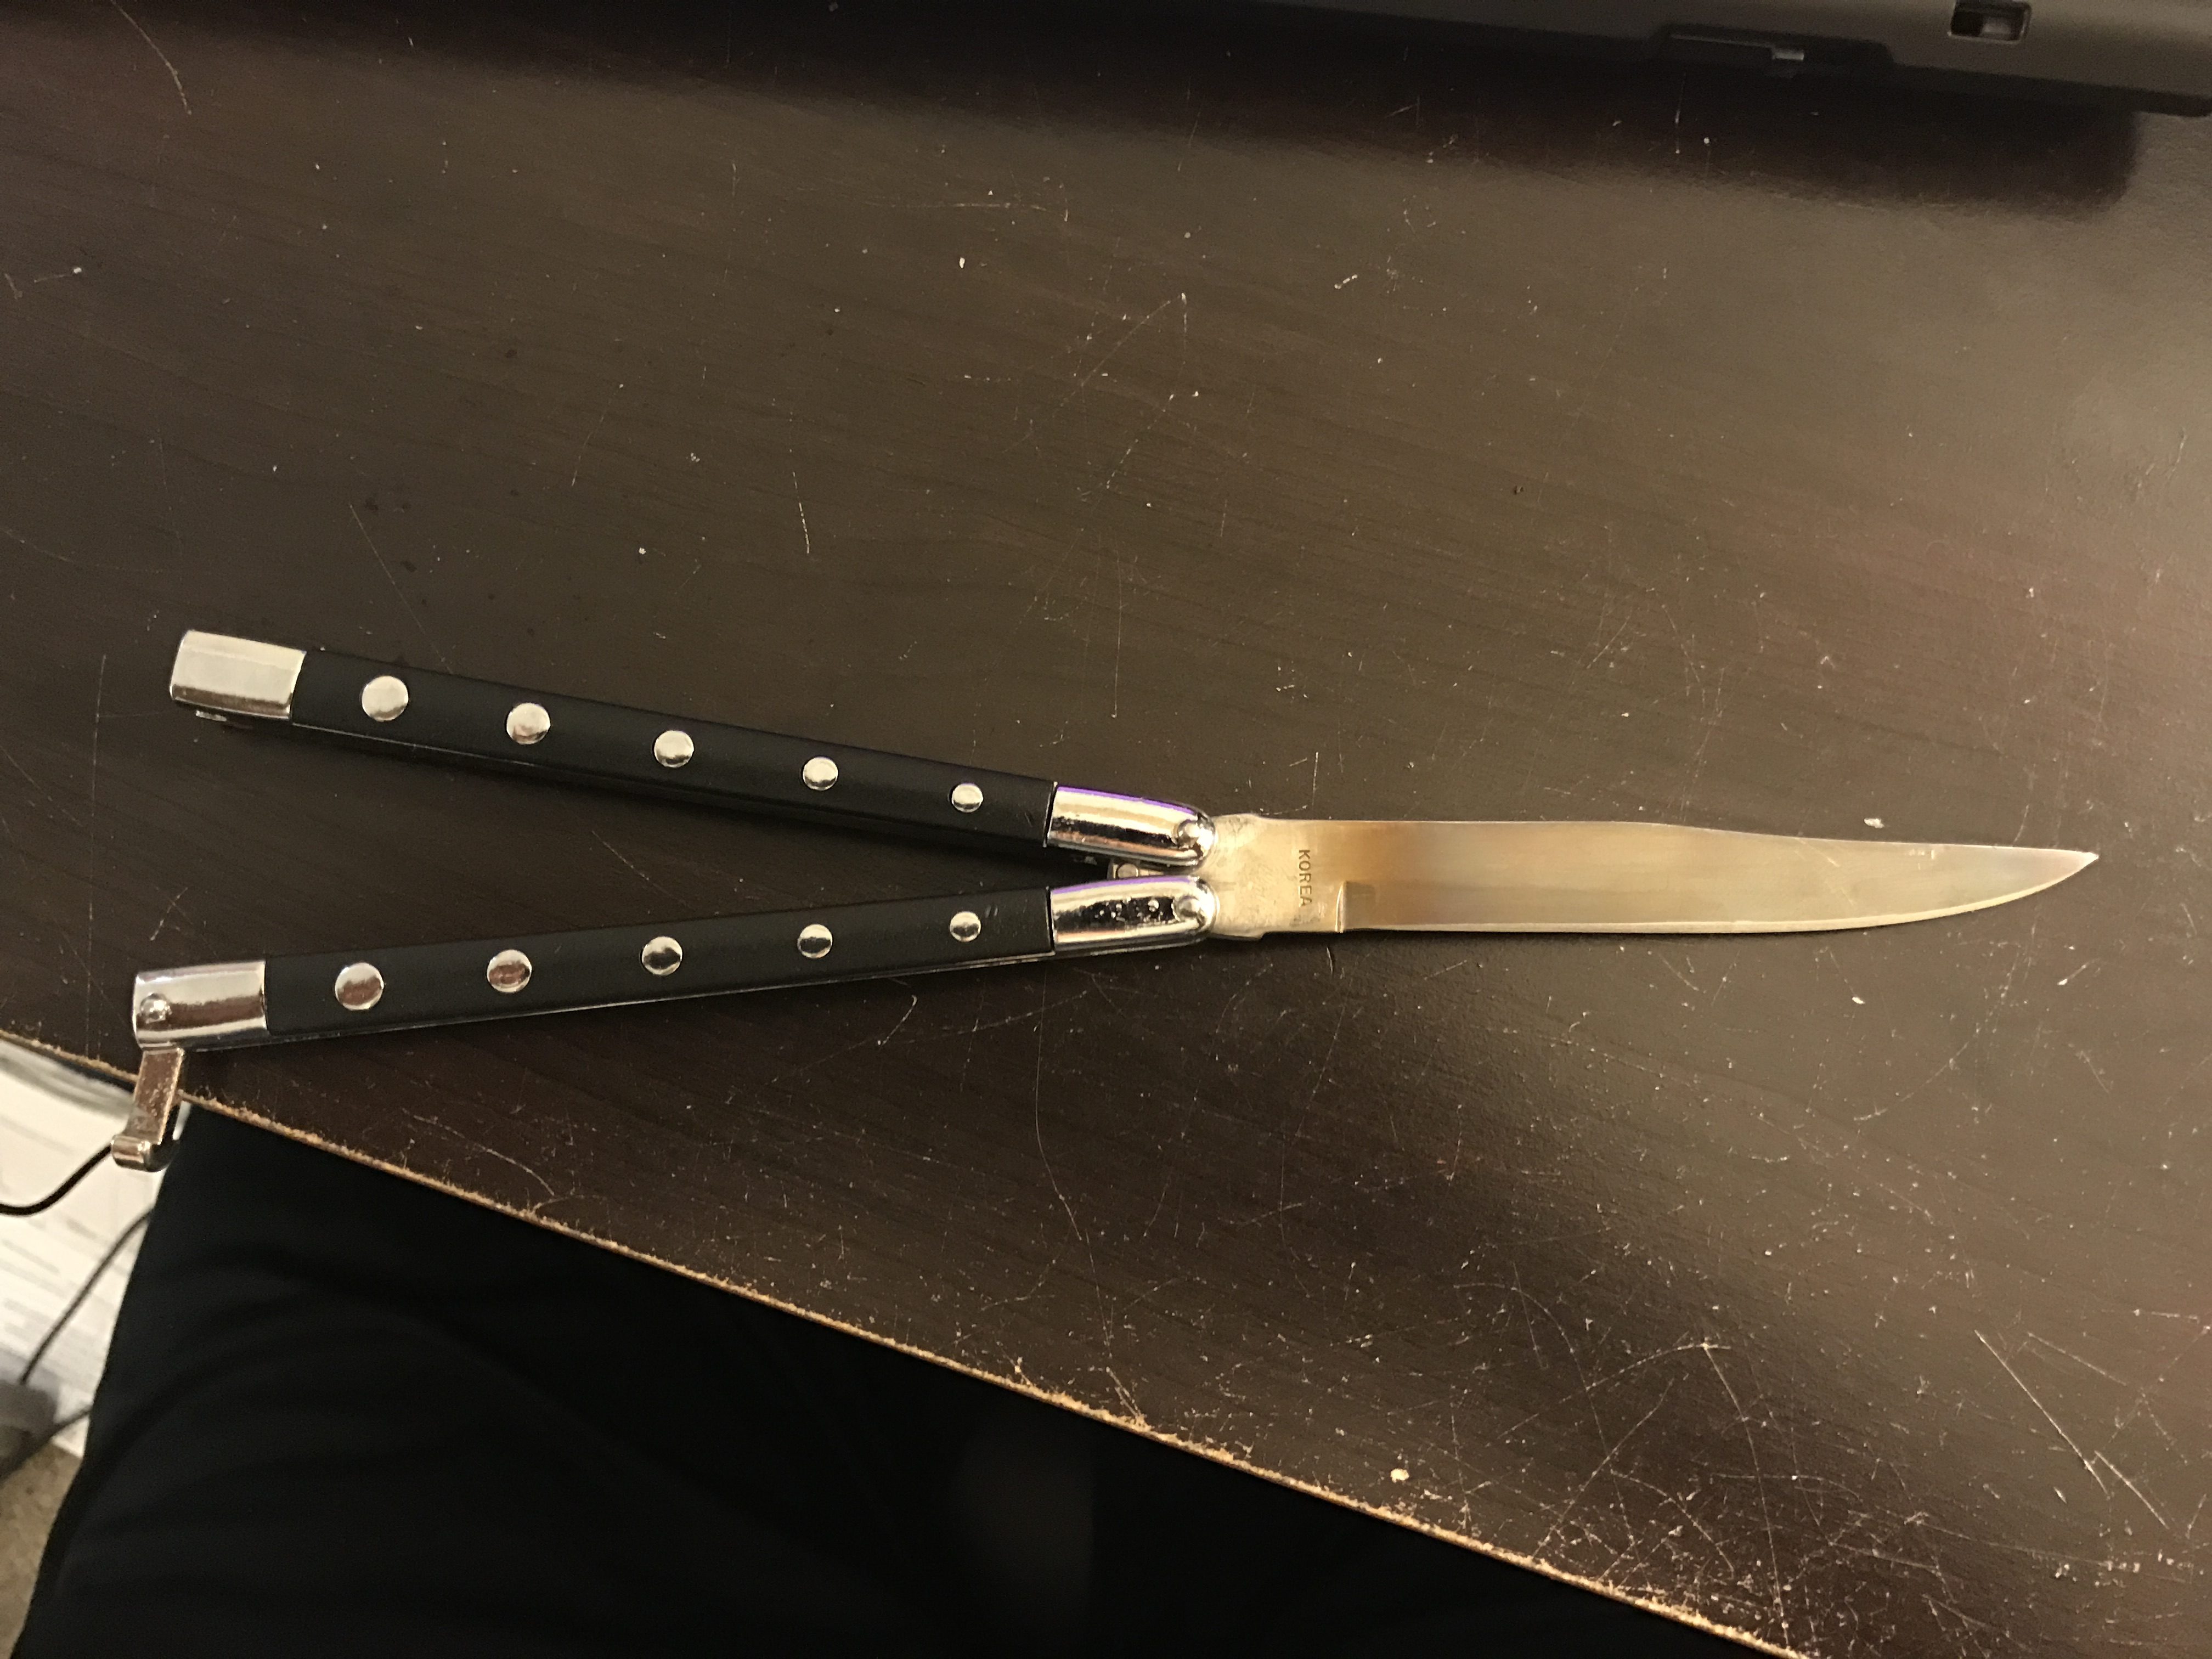 Main Project Report 1: Heat Colored Butterfly Knife – Aesthetics of Design